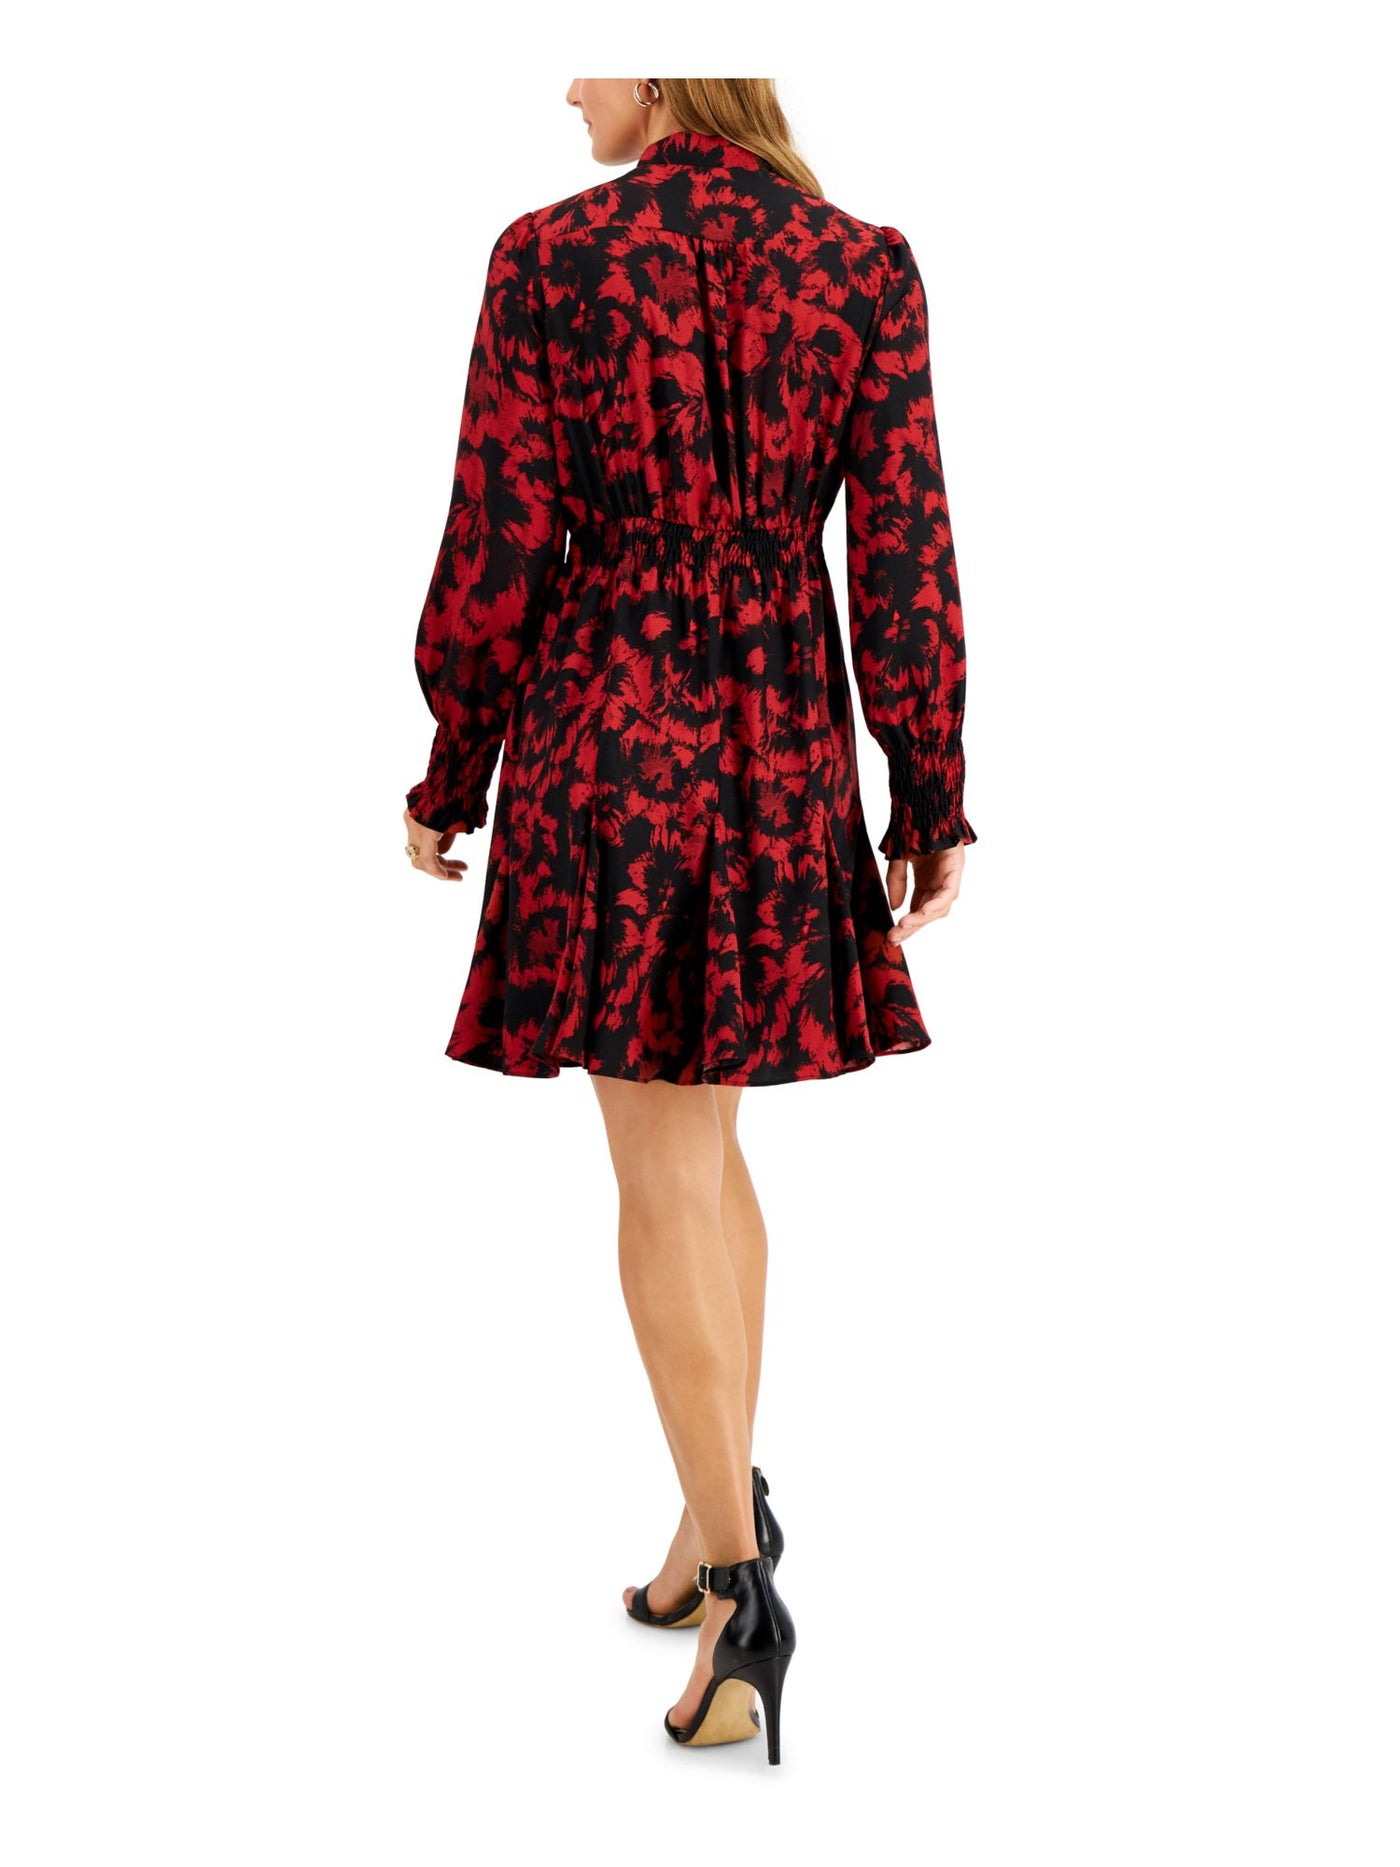 TAYLOR PETITE Womens Red Tie Smocked Unlined Pleated Floral Pouf Sleeve V Neck Above The Knee Party A-Line Dress Petites 14P